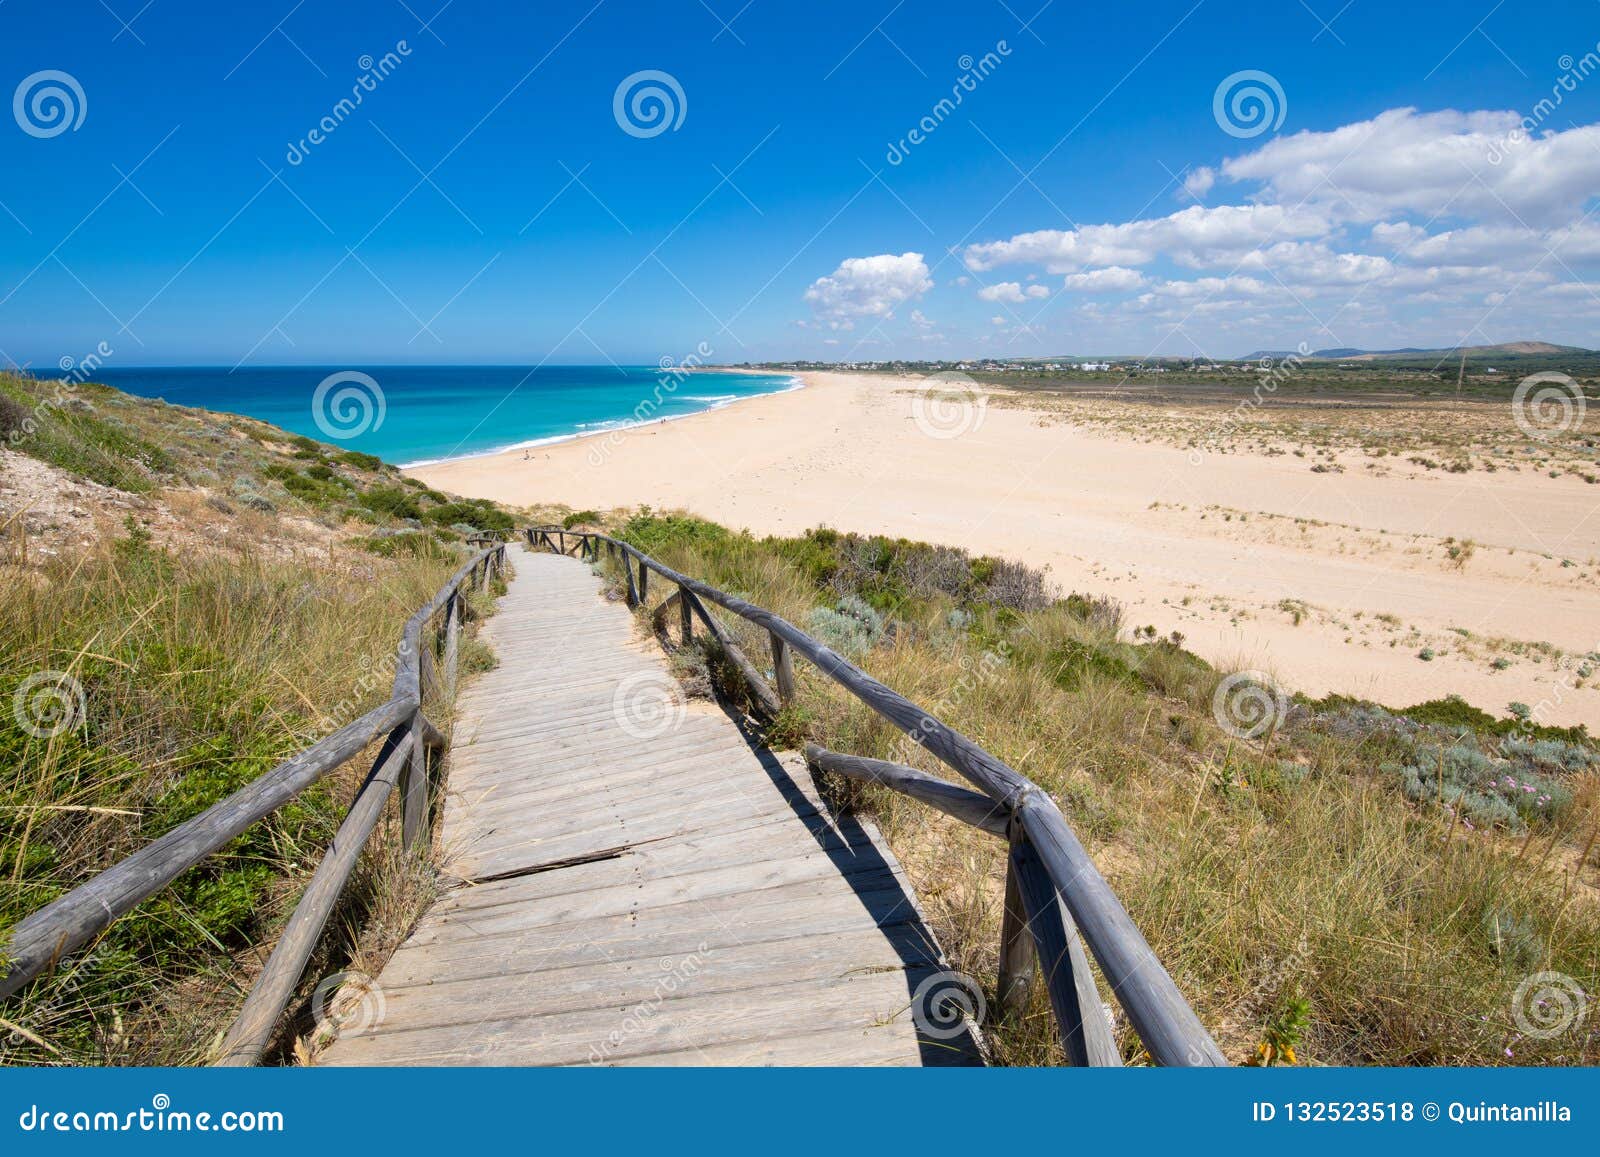 wooden ramp with railing down to the zahora beach